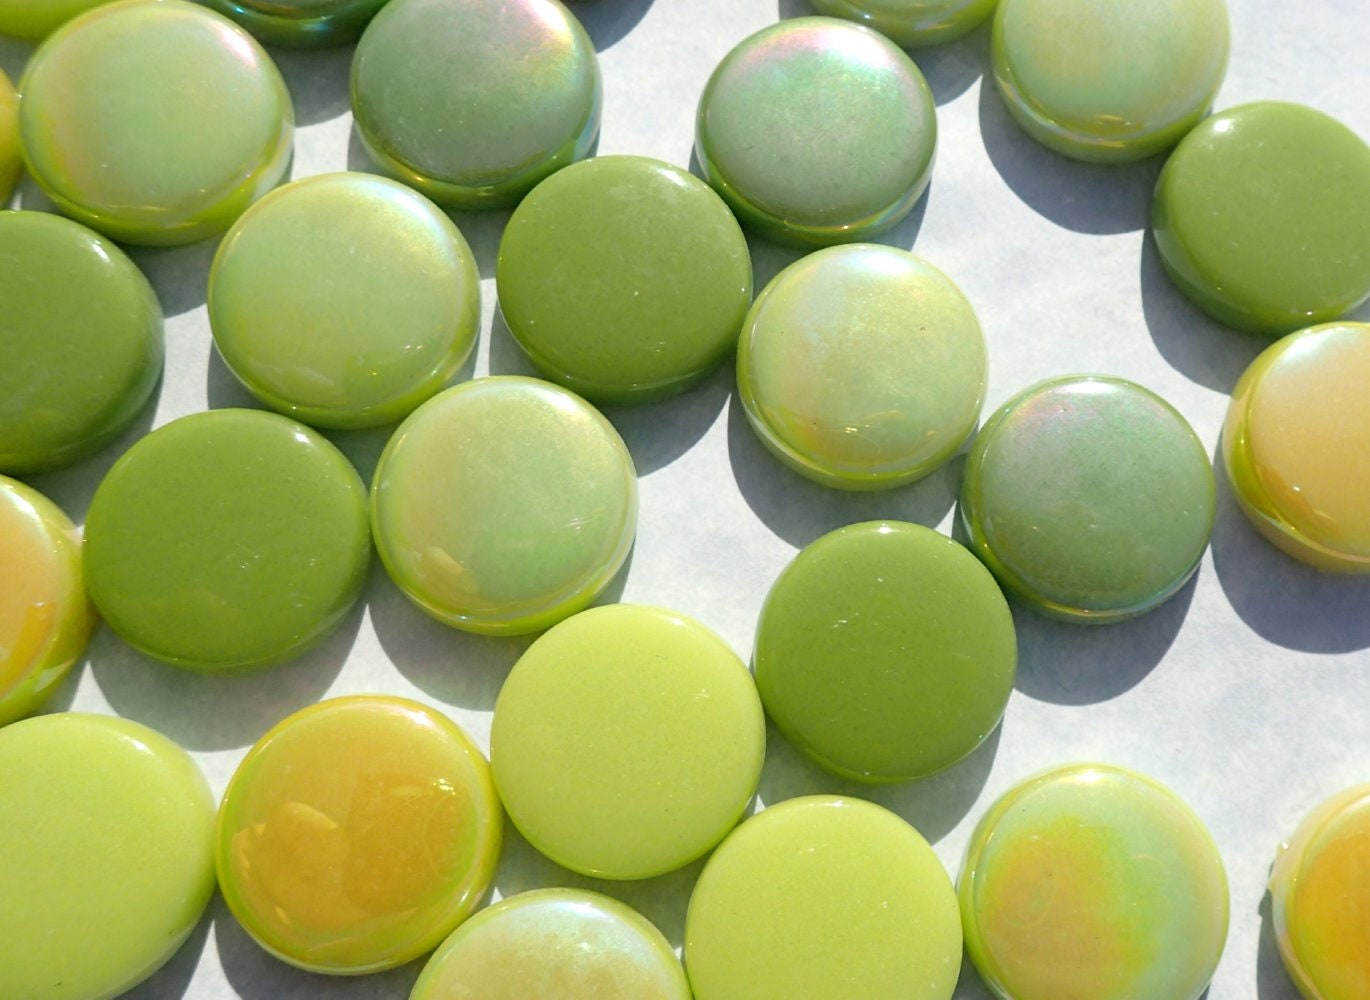 Spring Green Mix Large Glass Drops Mosaic Tiles - 100 grams - 20mm Mix of Gloss and Iridescent Glass Gems - Approx 20 Tiles